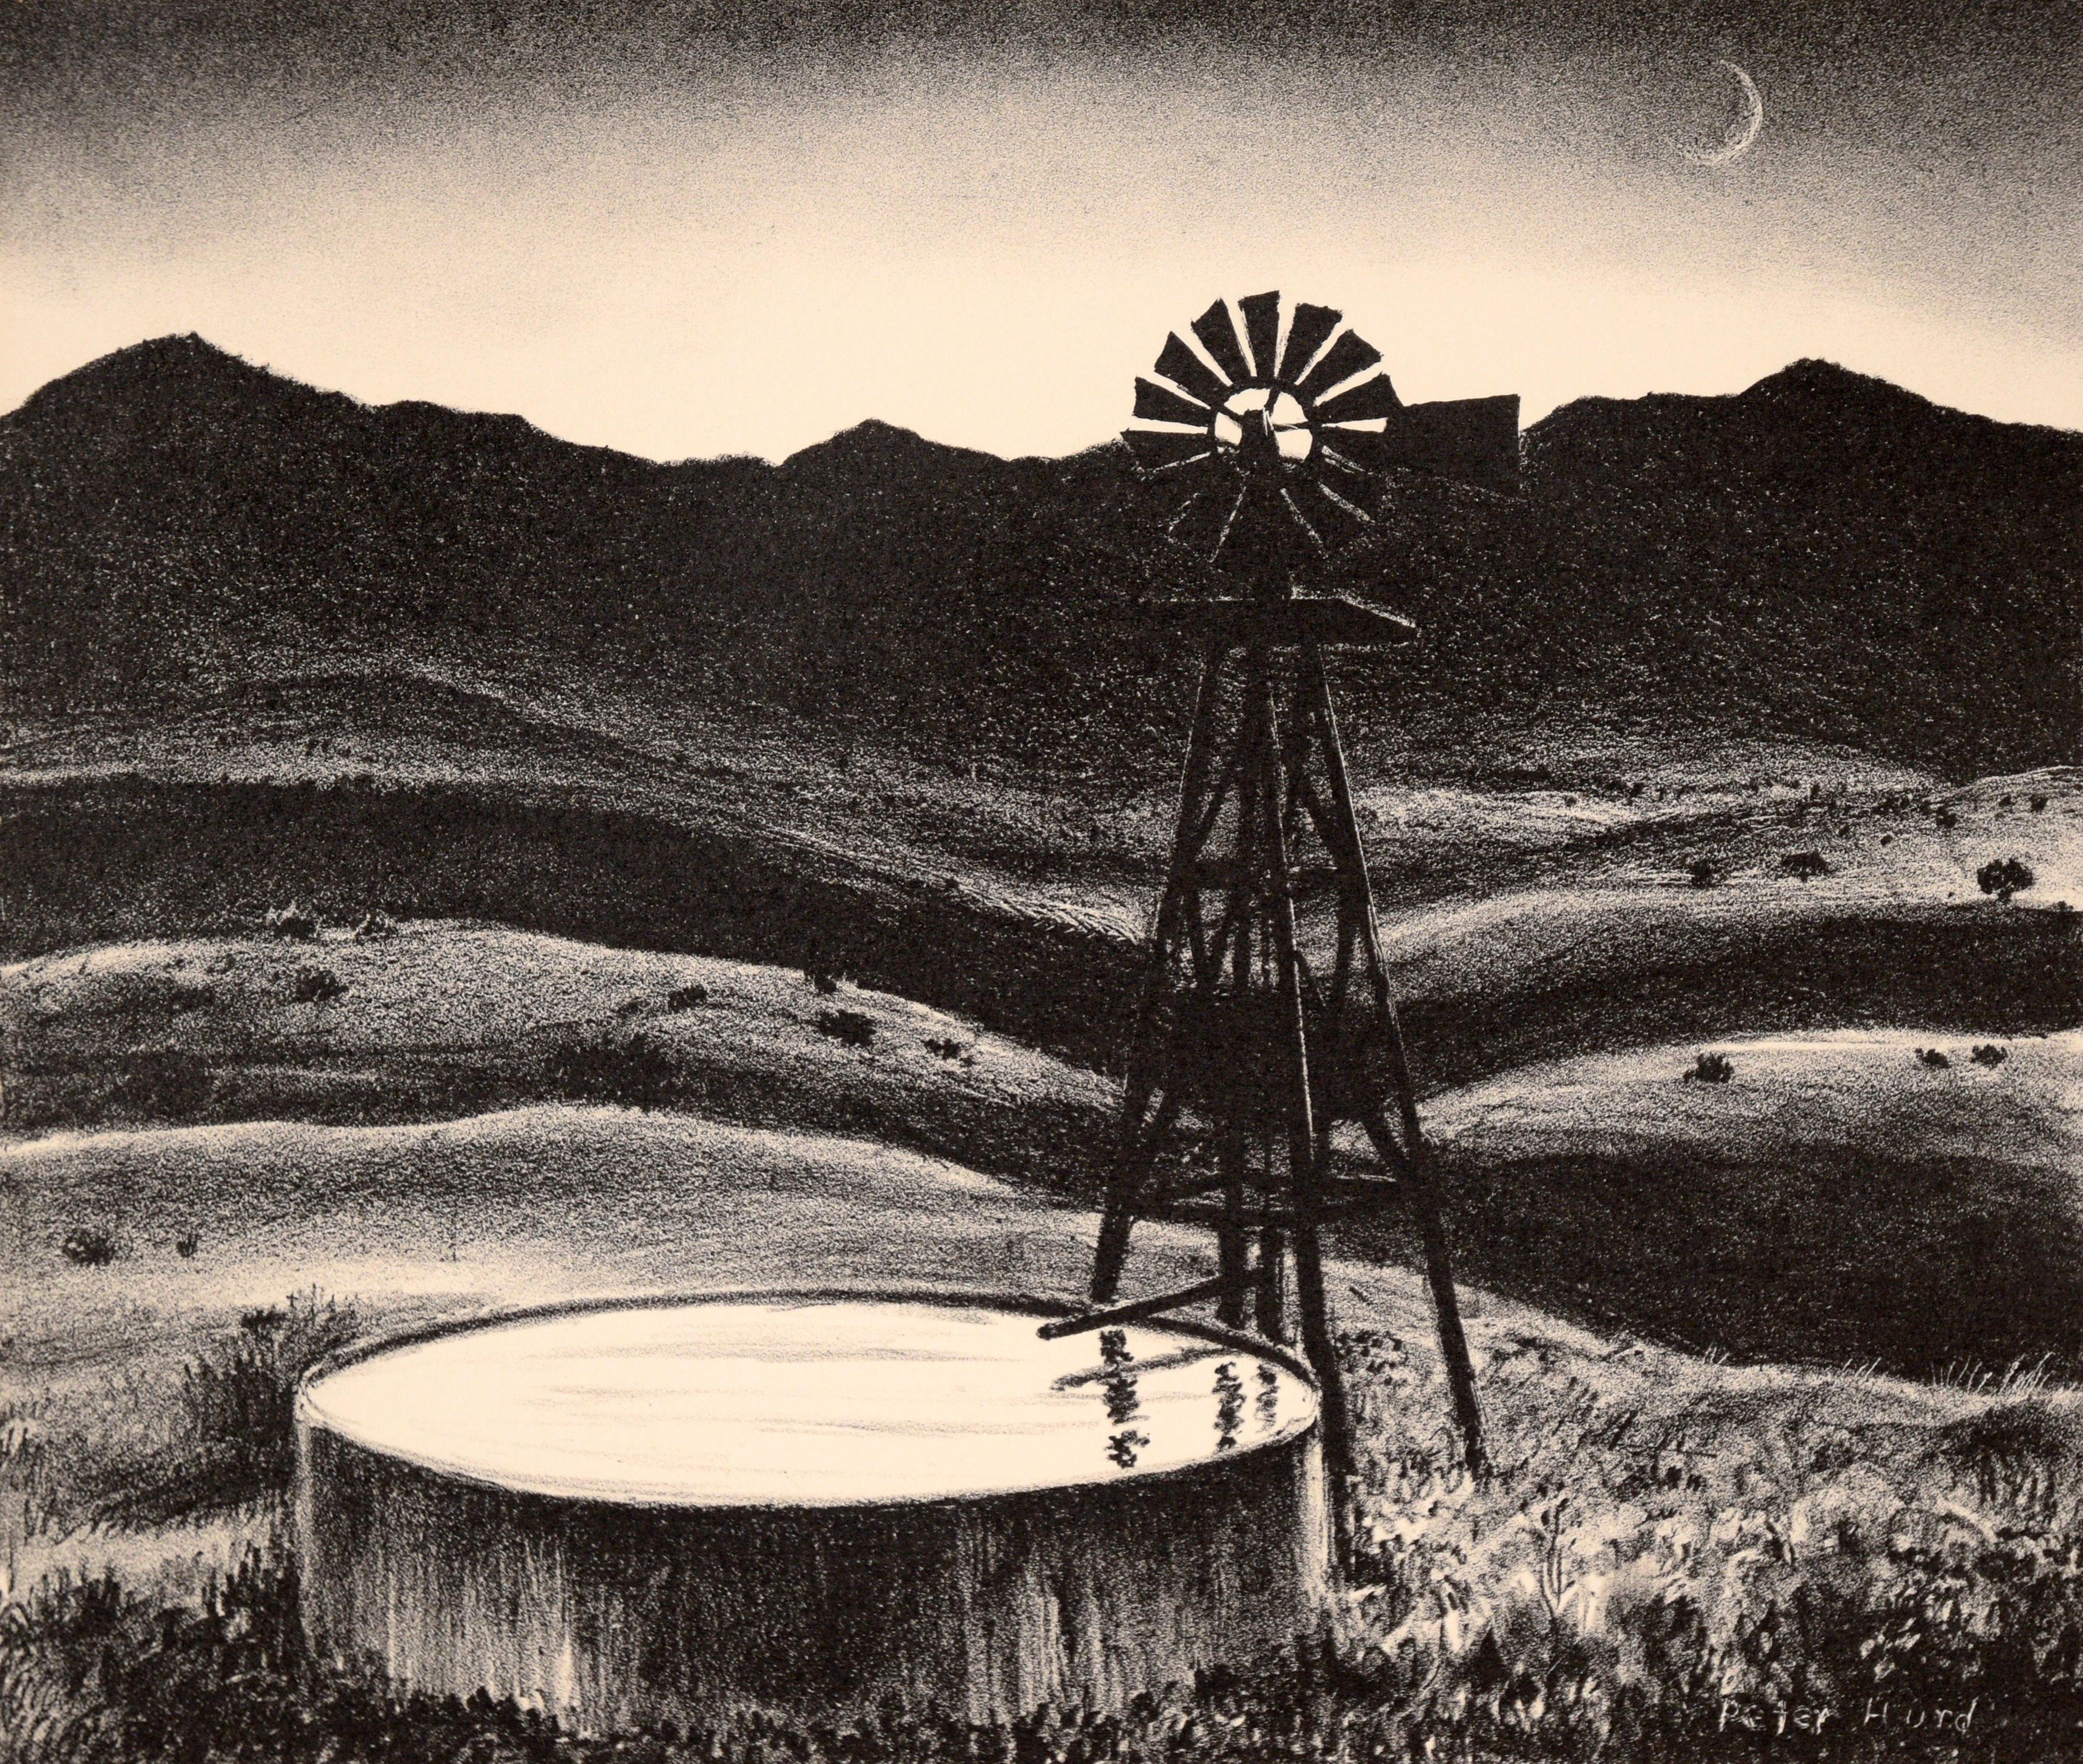 Windmill And Well At Dusk - Lithographie vintage originale - Print de Peter Hurd